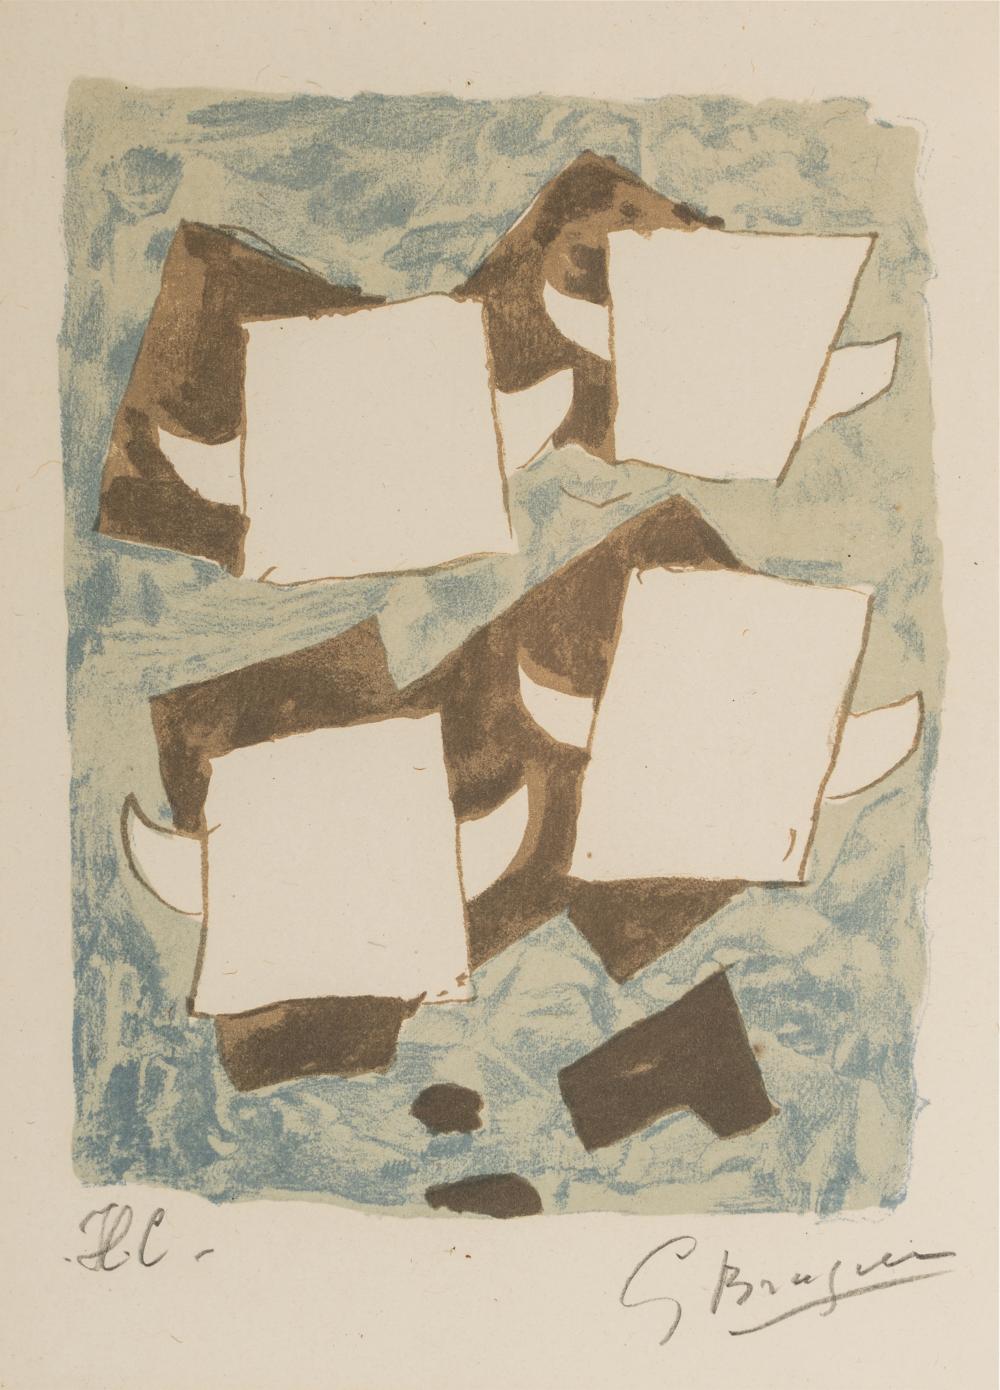 GEORGES BRAQUE (1882 - 1963): UNTITLEDlithograph